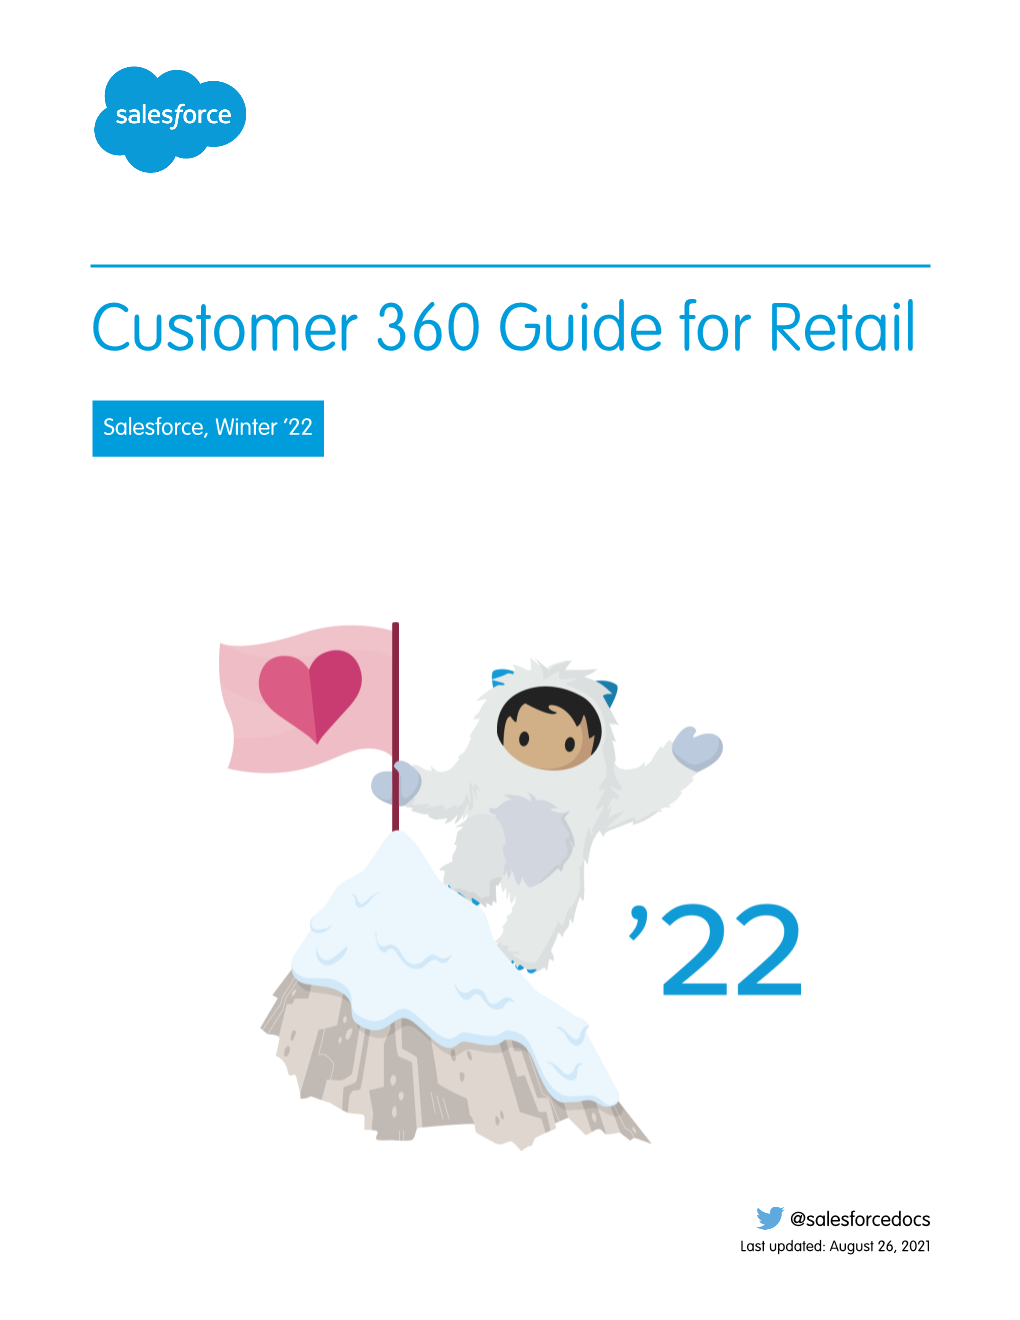 Customer 360 Guide for Retail